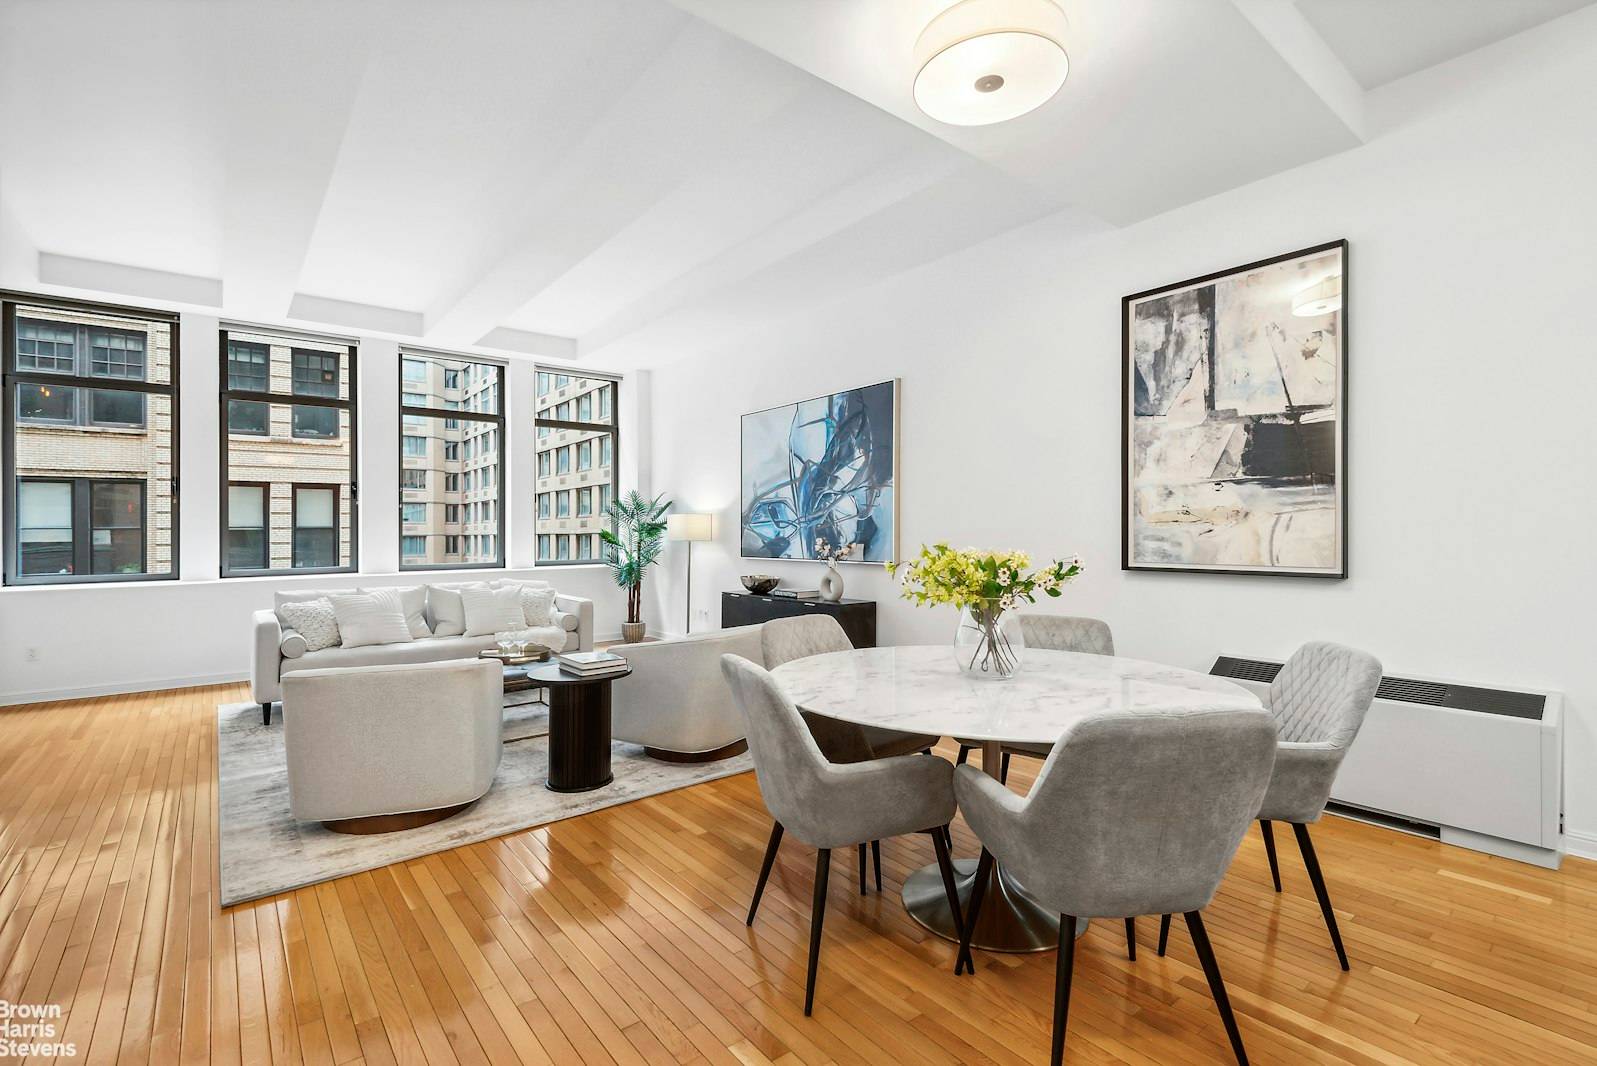 Presenting this elegant and deluxe two bedroom, two bathroom home at the coveted Chelsea Mercantile Condominium, situated in the heart of prime Chelsea.